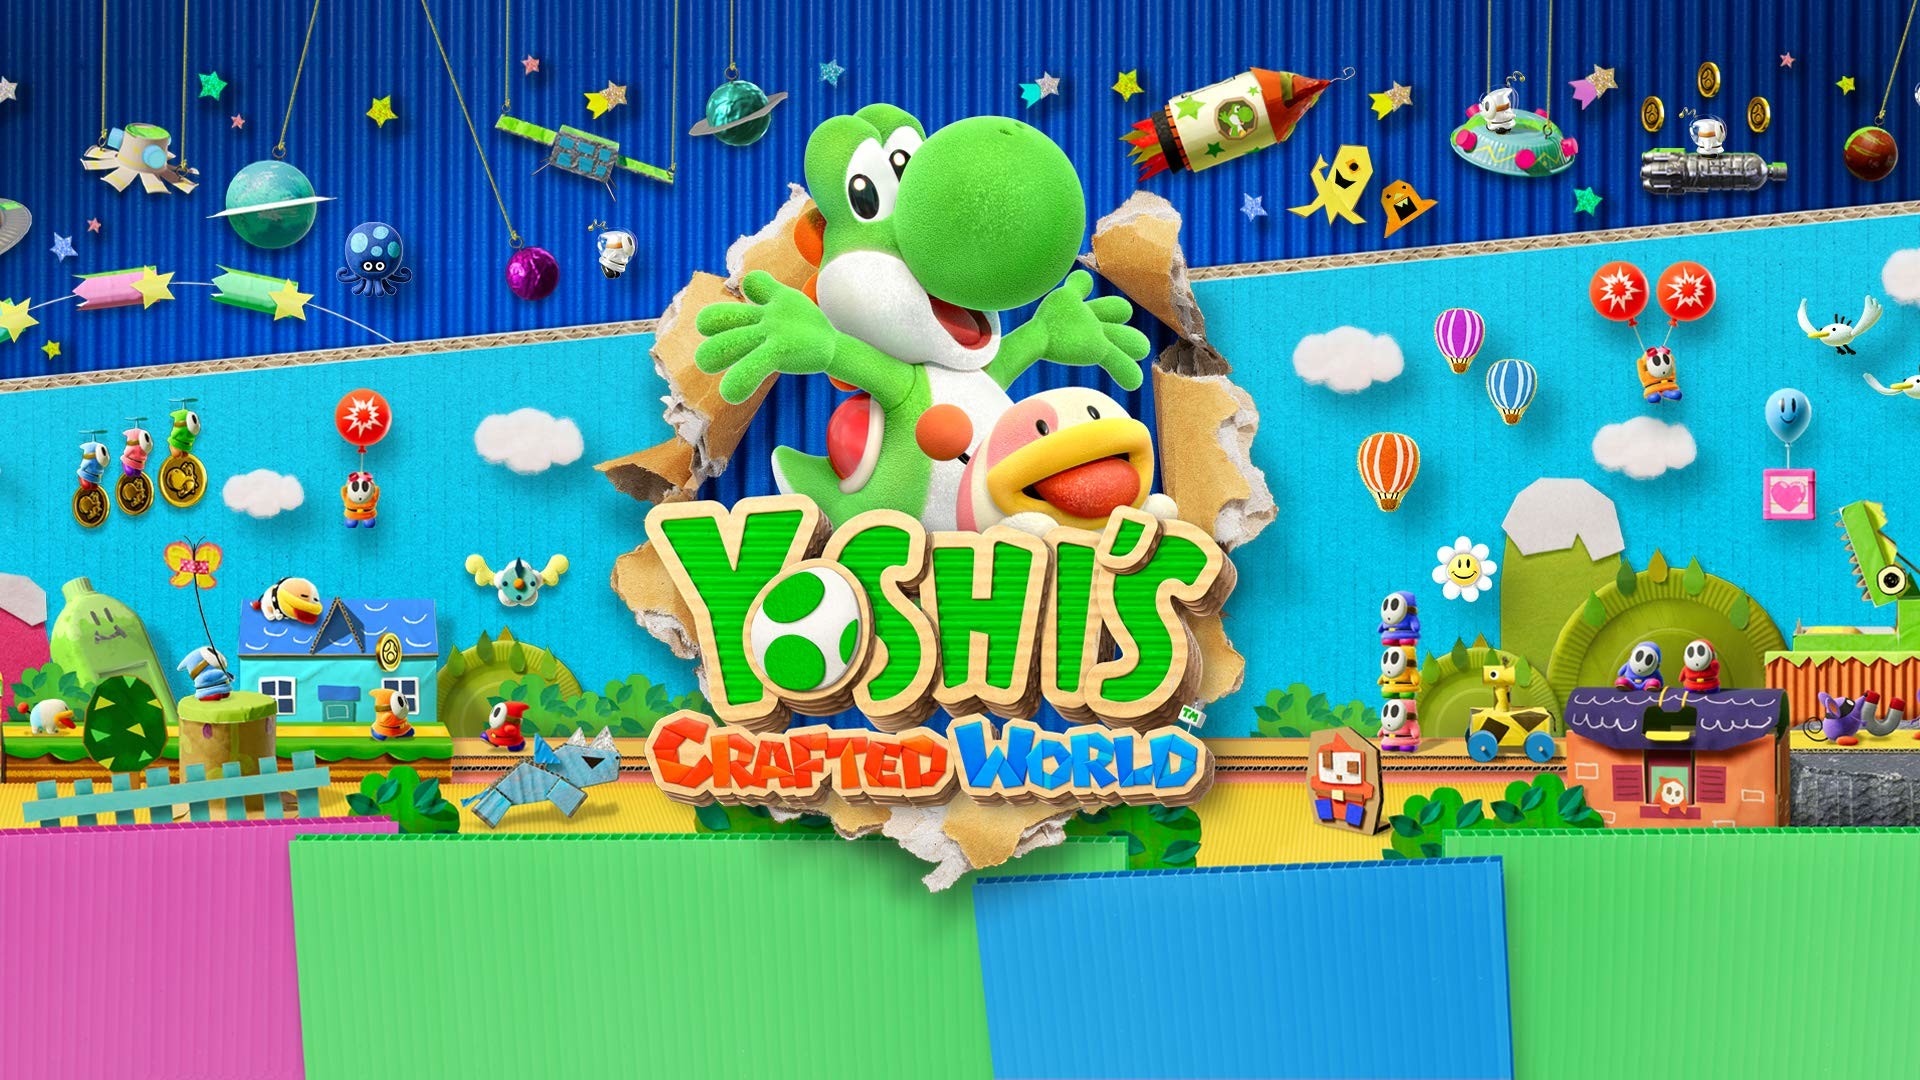 1920x1080 Yoshi's Crafted World HD Wallpaper | Background Image |  |  ID:984088 - Wallpaper Abyss